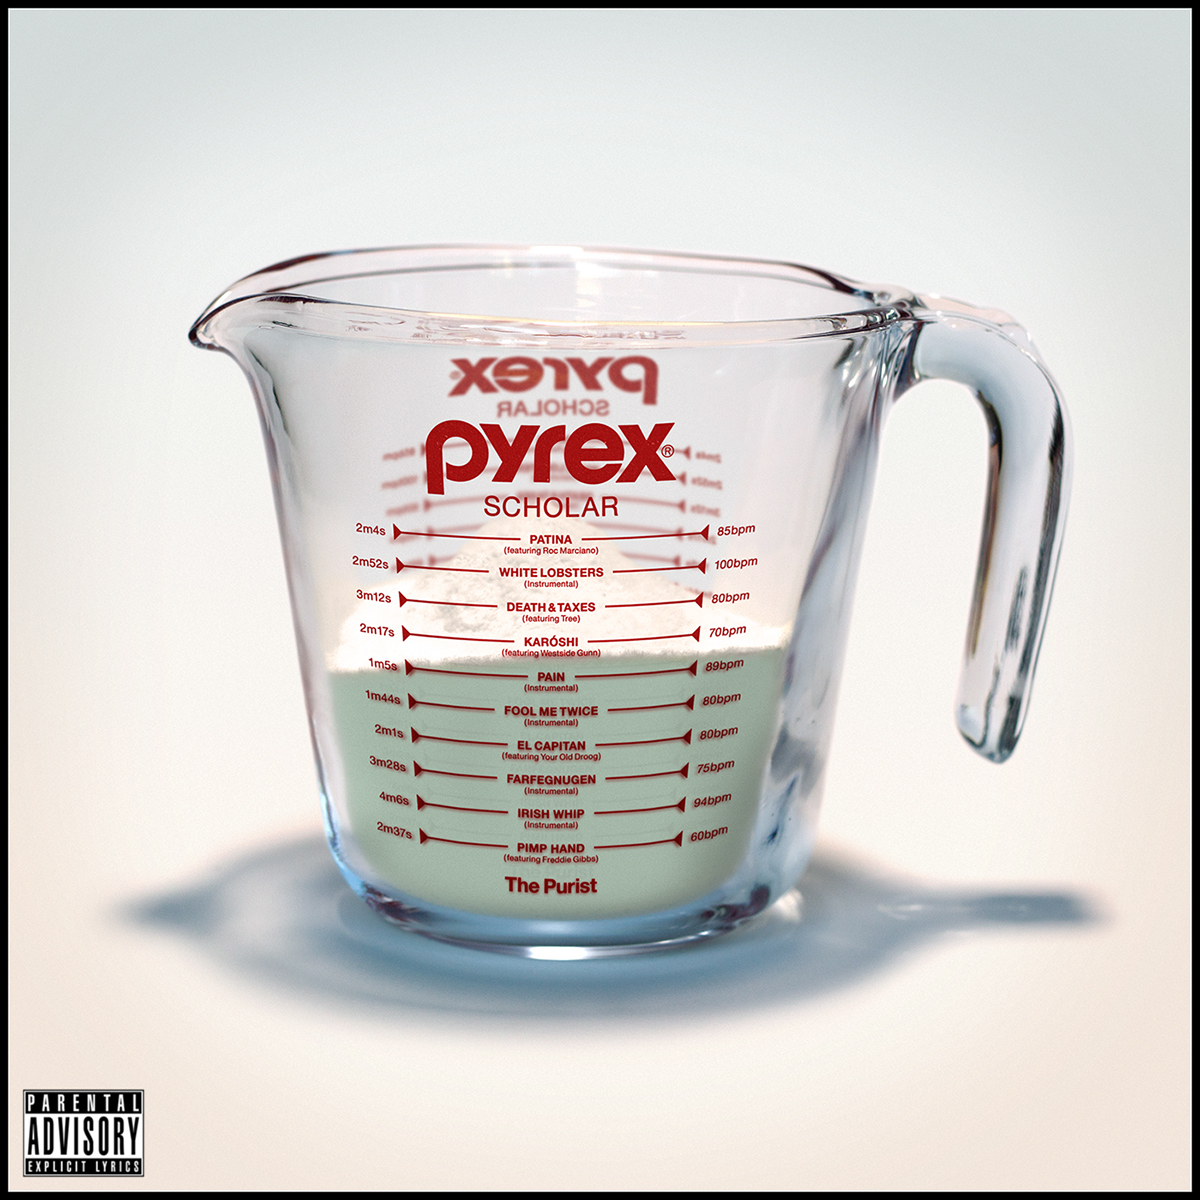 The Purist pyrex Pyrex Scholar Your Old Droog Roc Marciano Westside Gunn freddie gibbs record sleeve design record cover art